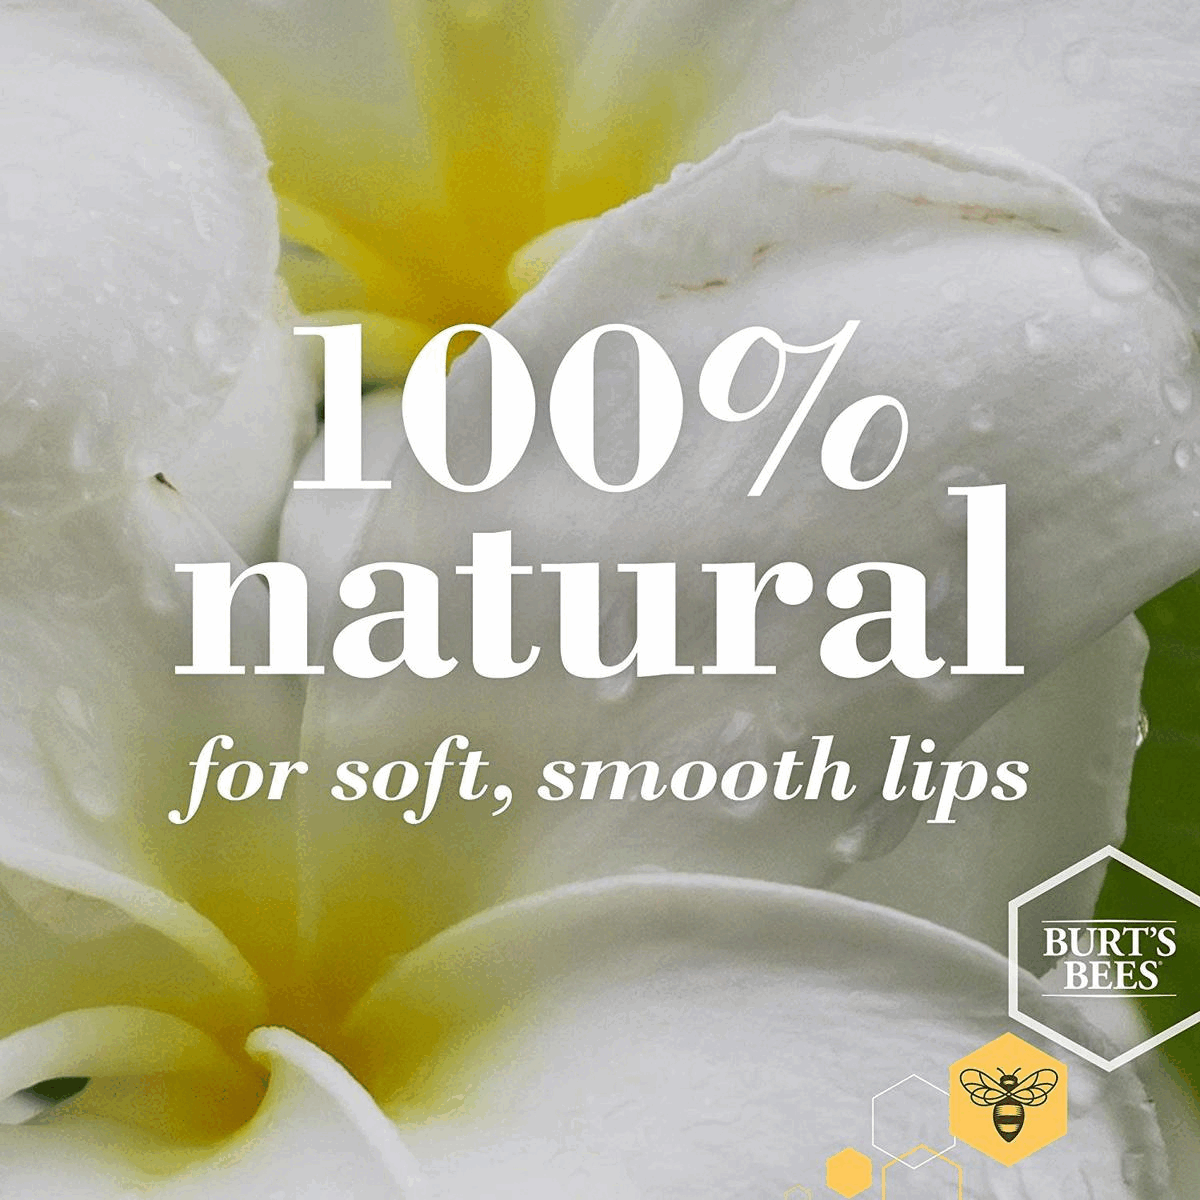 for soft, smooth lips,
            KIND TO SKIN & PLANET SINCE 1984 
            Ingredients From Nature 
            Leaping Bunny Certified 
            Landfill-free Operations 
            oiA 
            Responsible Sourcing 
            Recyclable Packaging